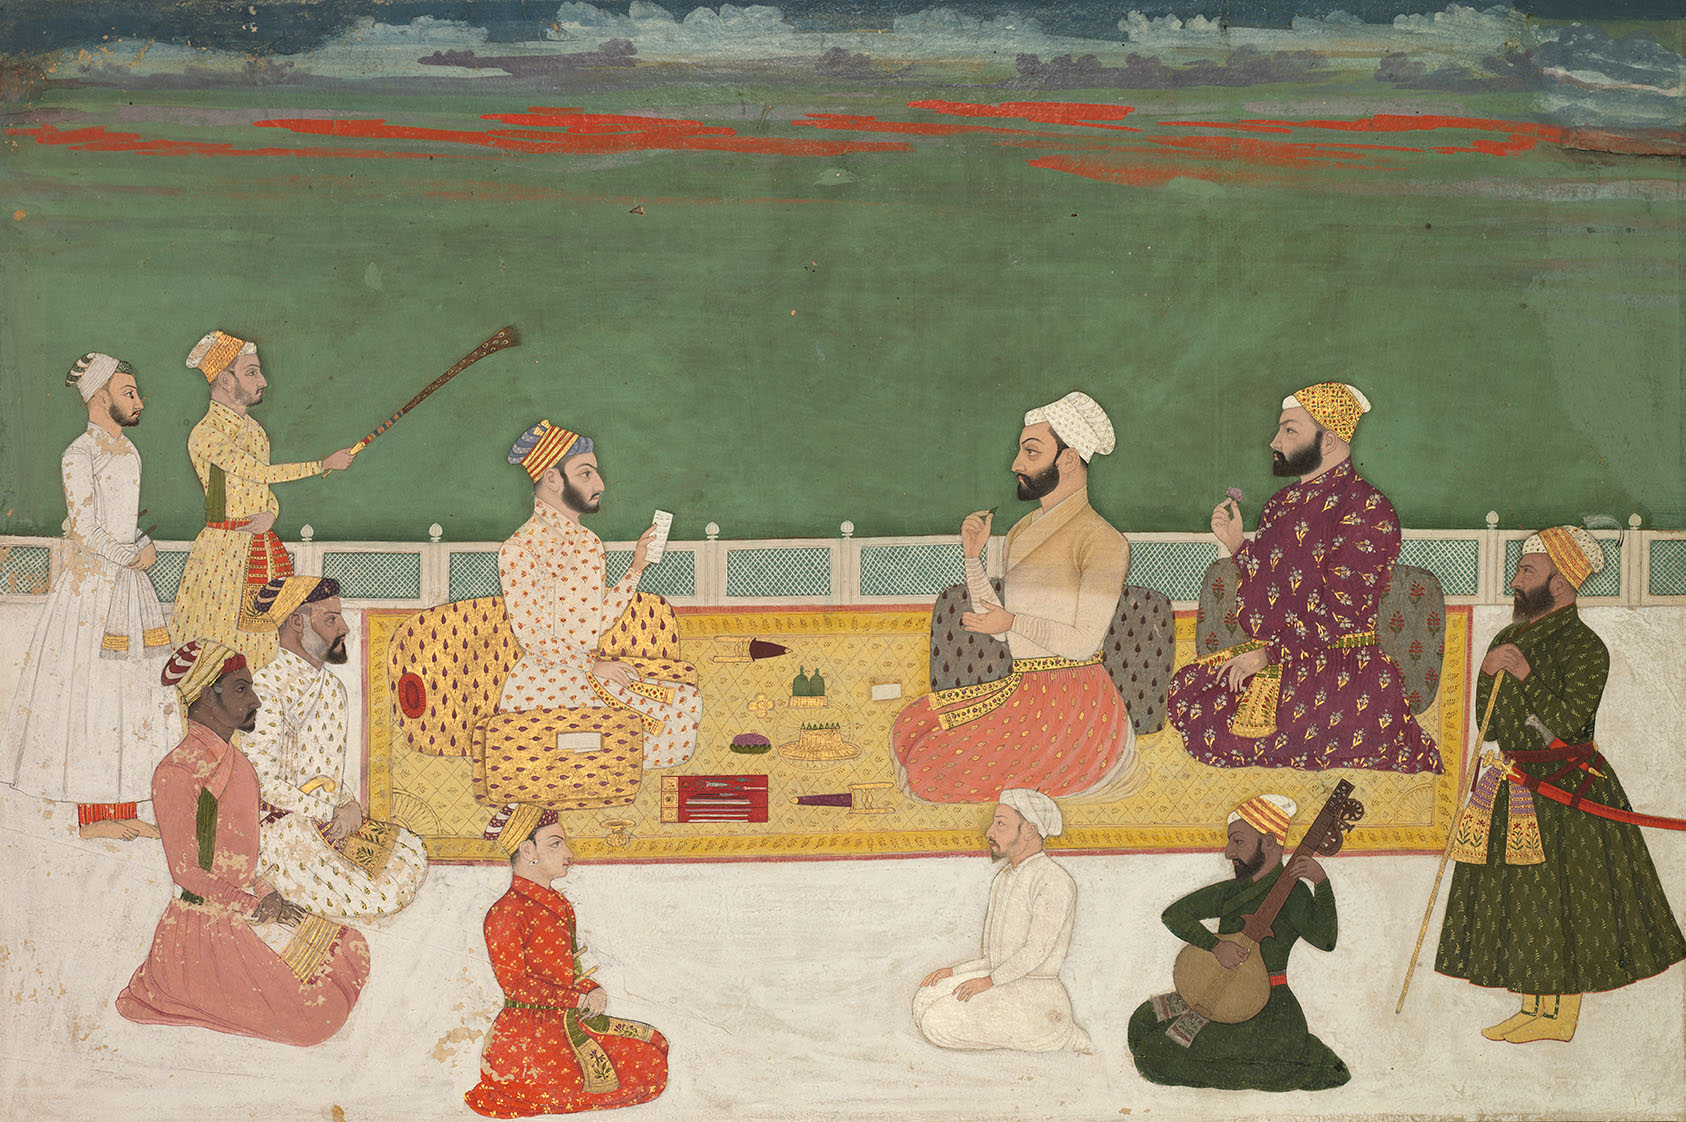 A painting depicting three noblemen seated on a carpet, accompanied by attendants and a musician.